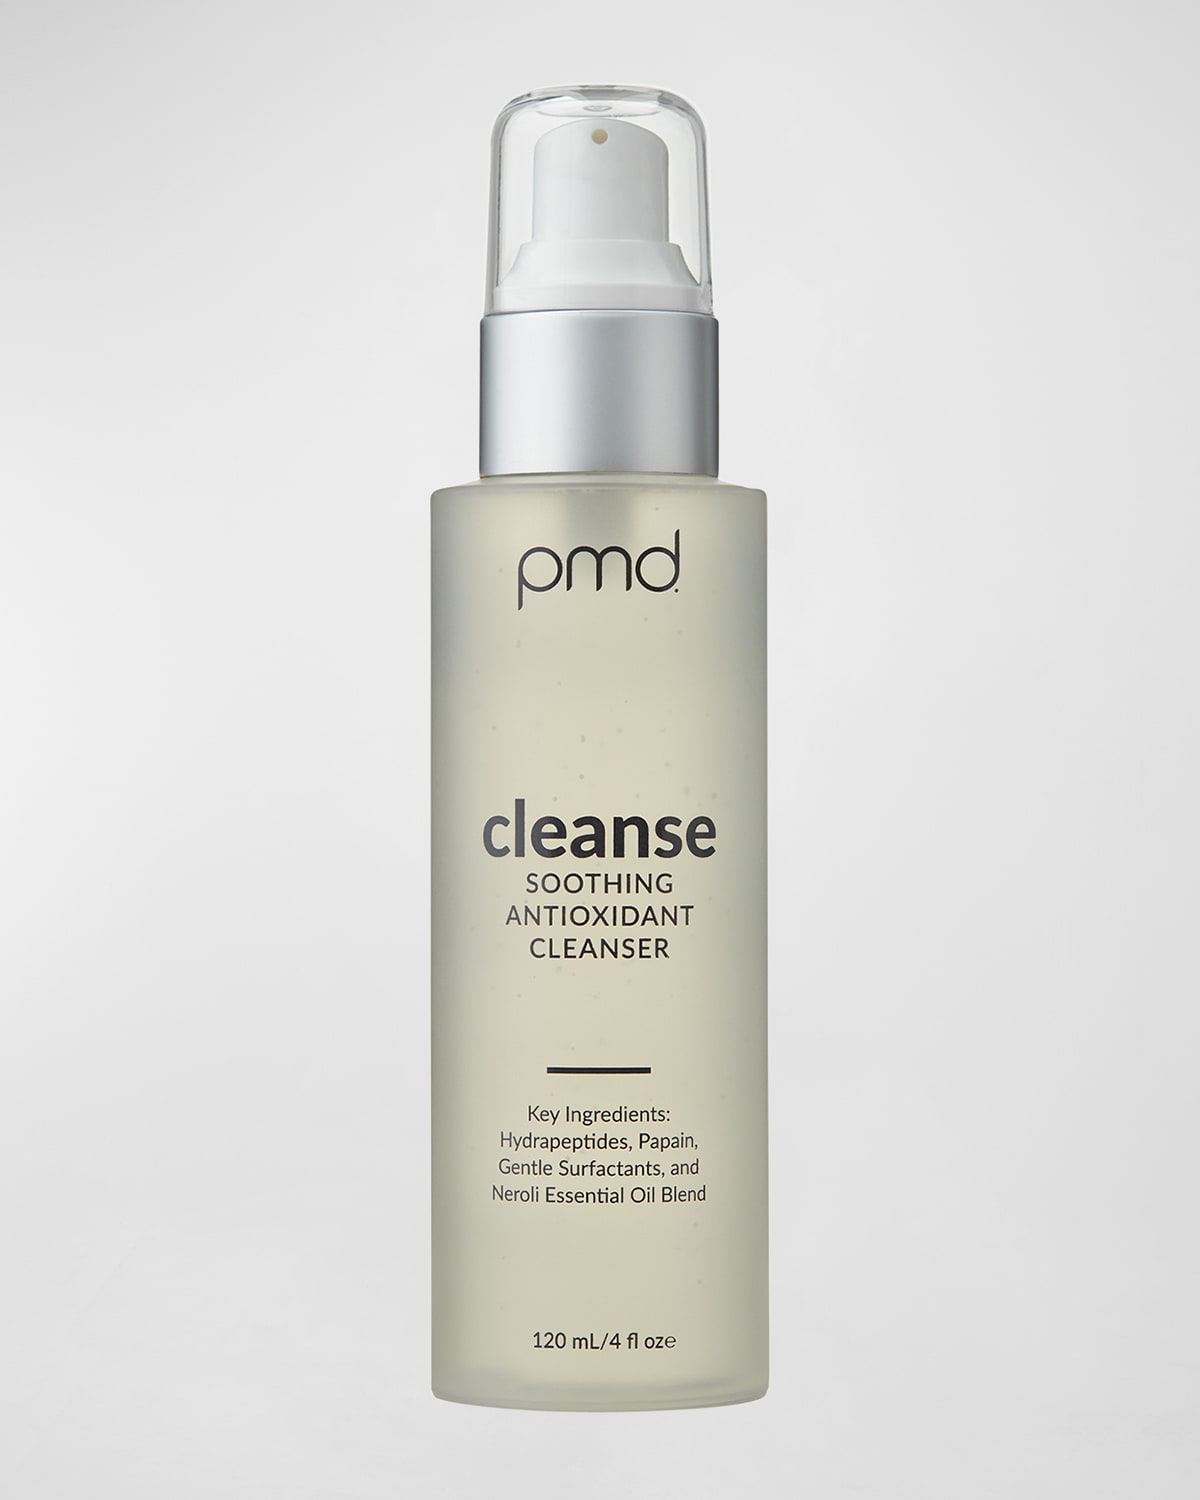 Cleanse: Soothing Antioxidant Cleanser, 4 oz.